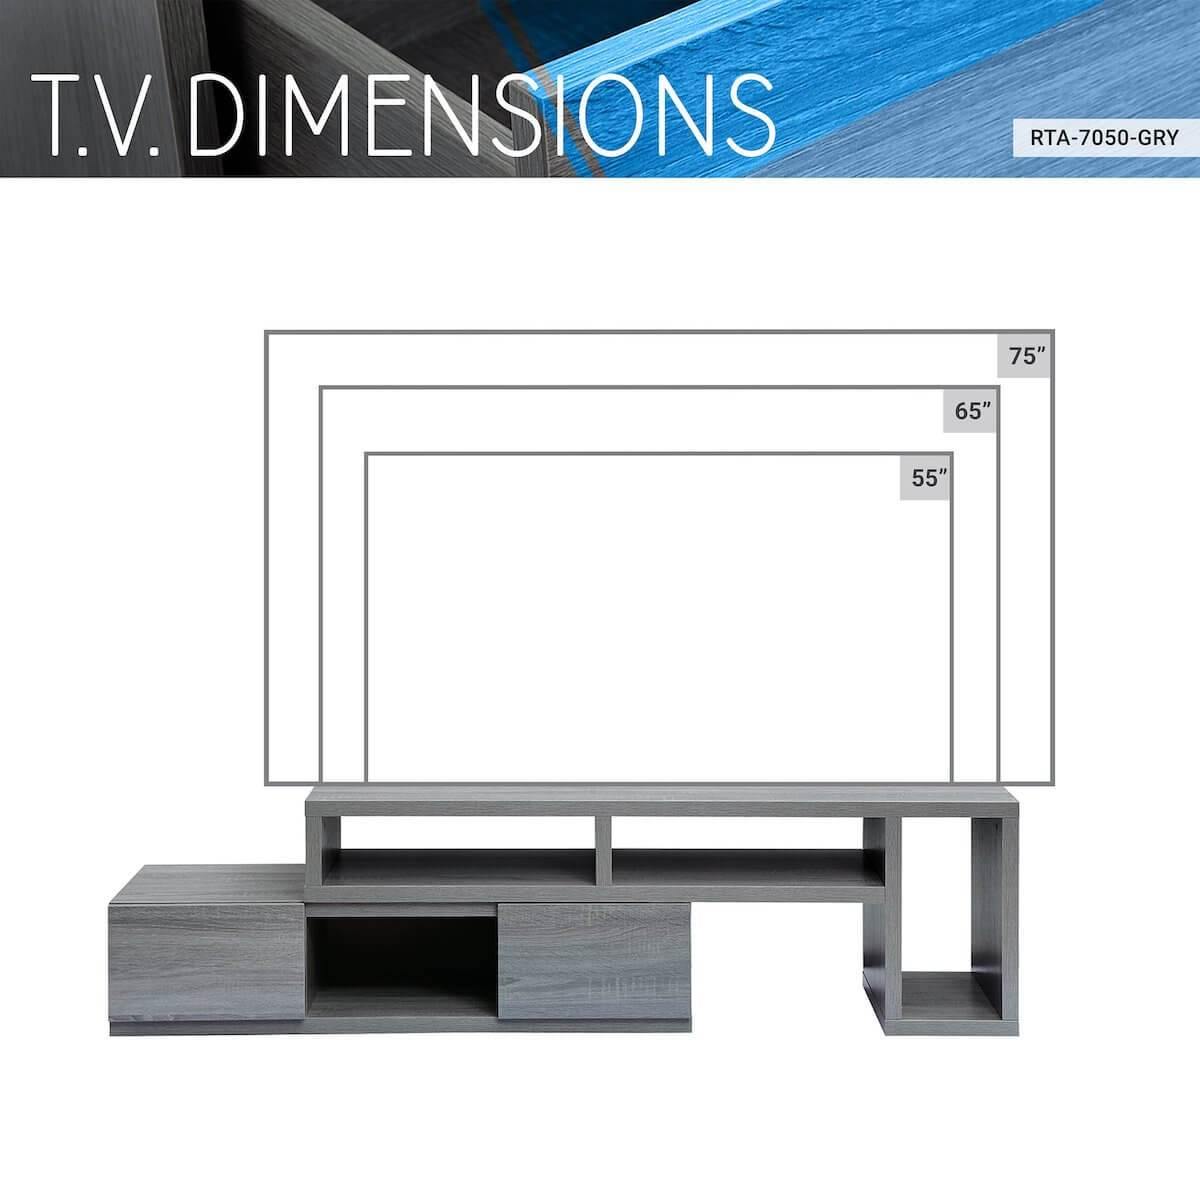 Techni Mobili Adjustable TV Stand Console for TVs Up to 65" RTA-7050-GRY TV Dimensions